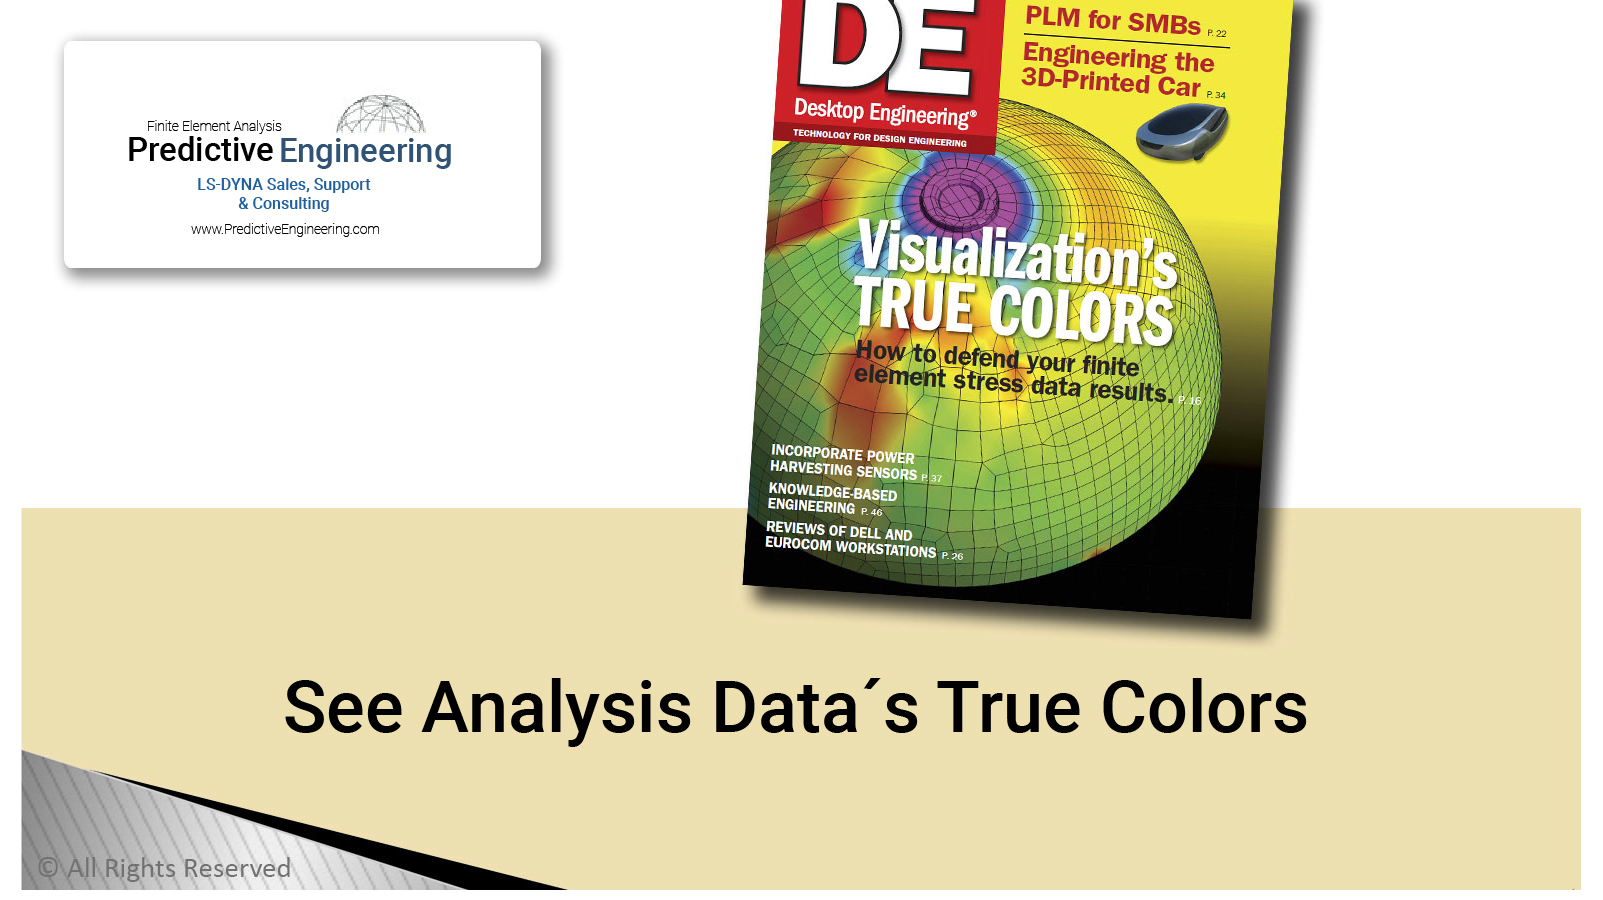 See Analysis Data's True Colors Image